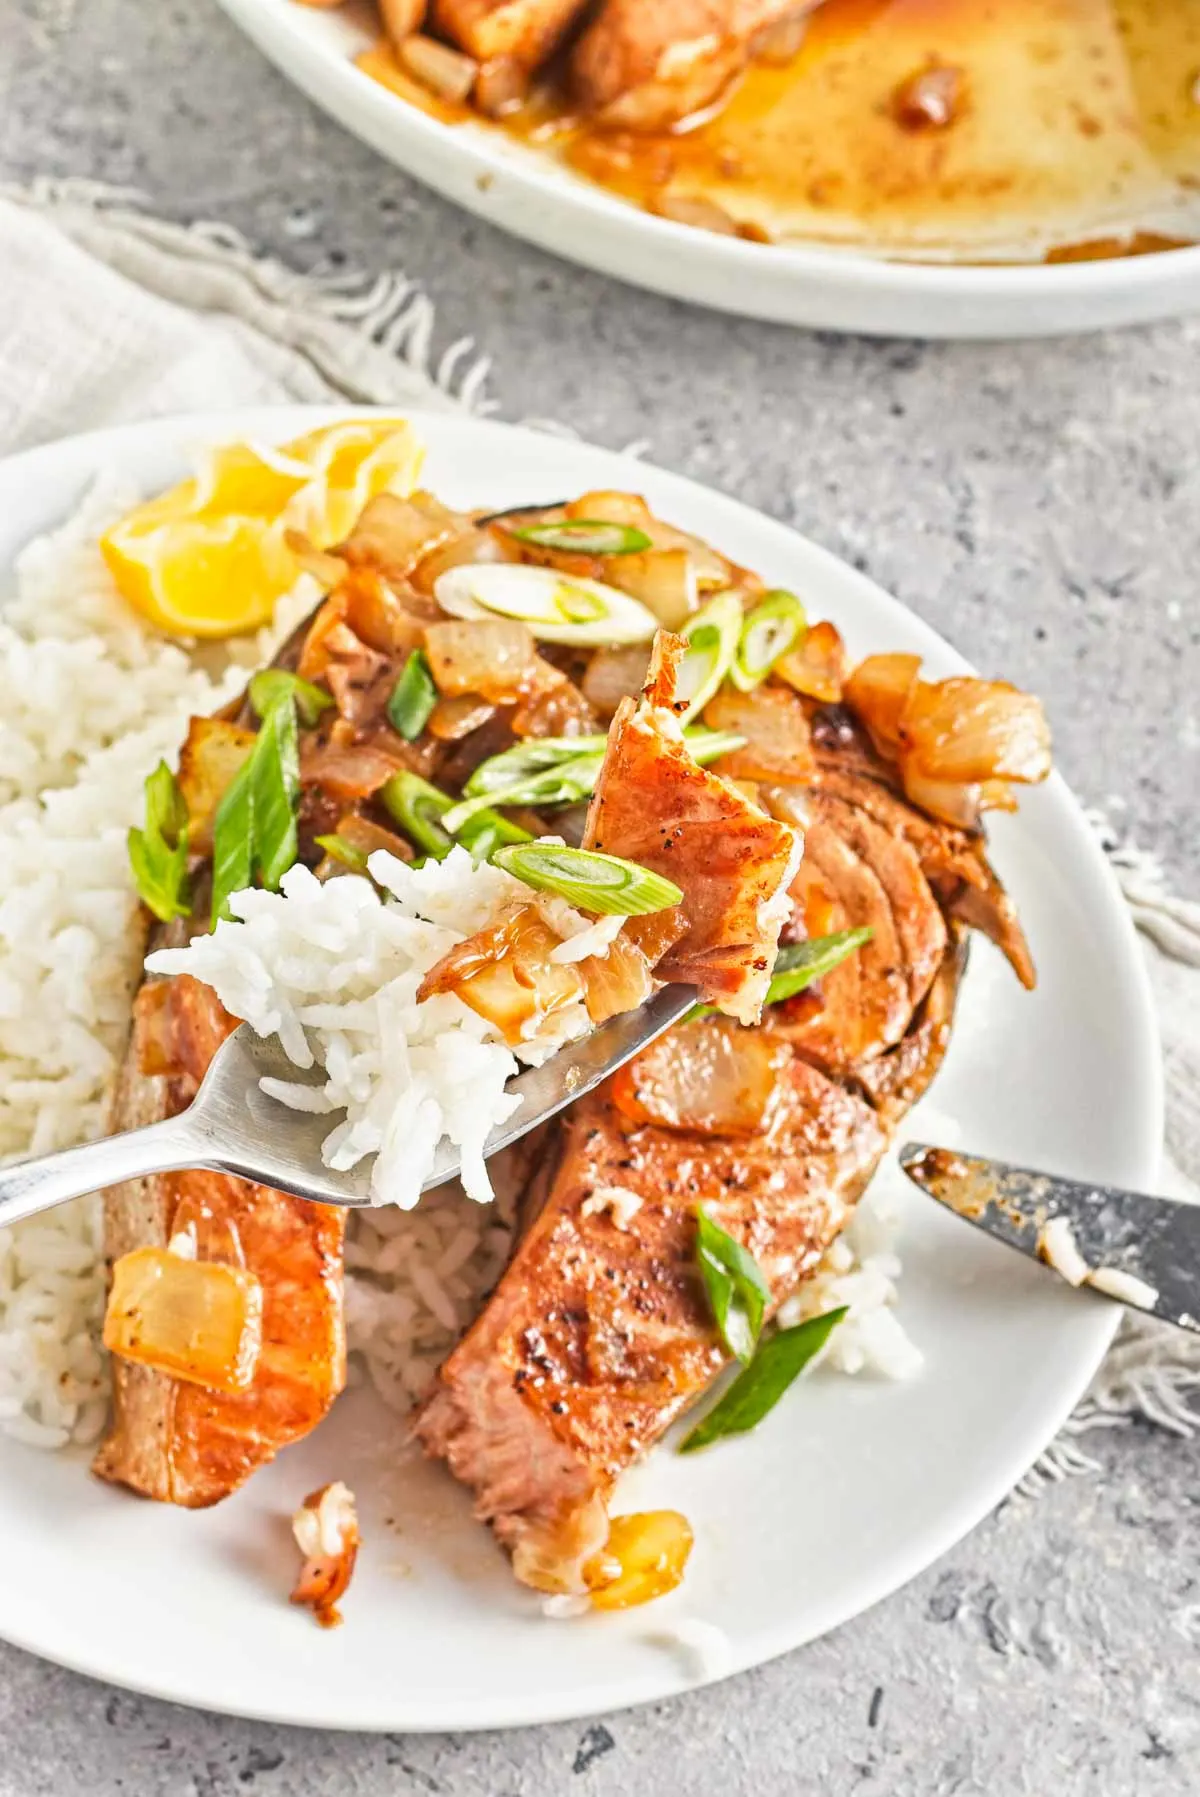 Piece of salmon and rice on a fork.